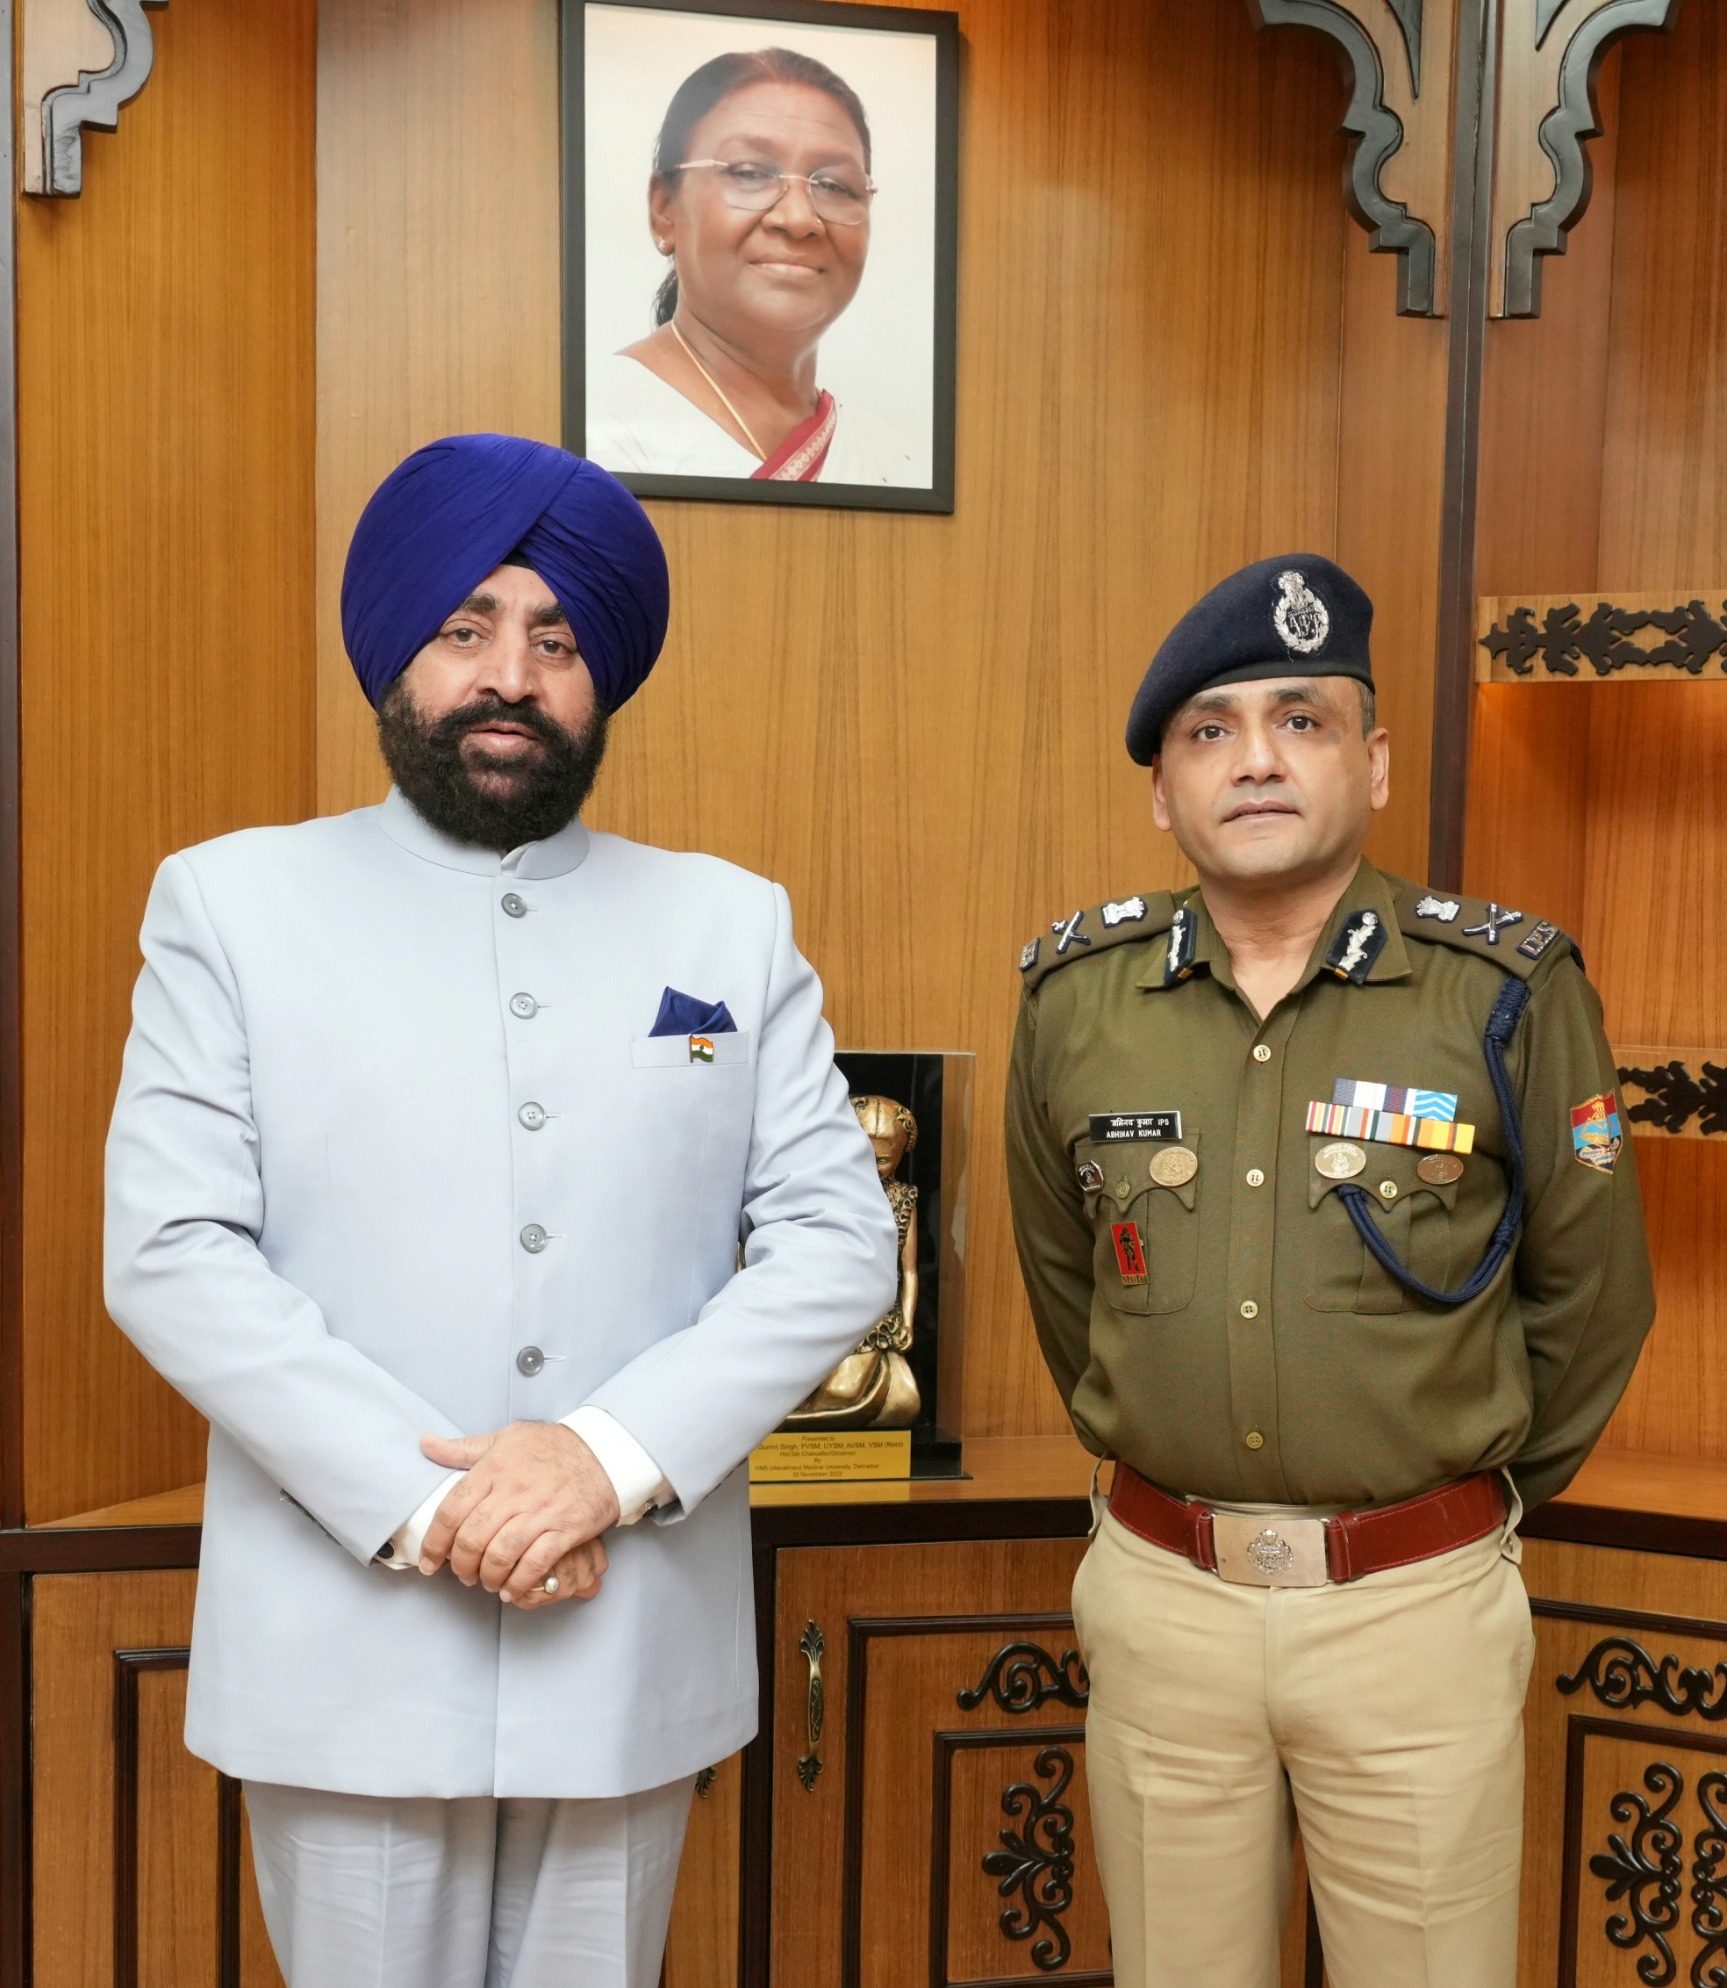 DGP met the Governor